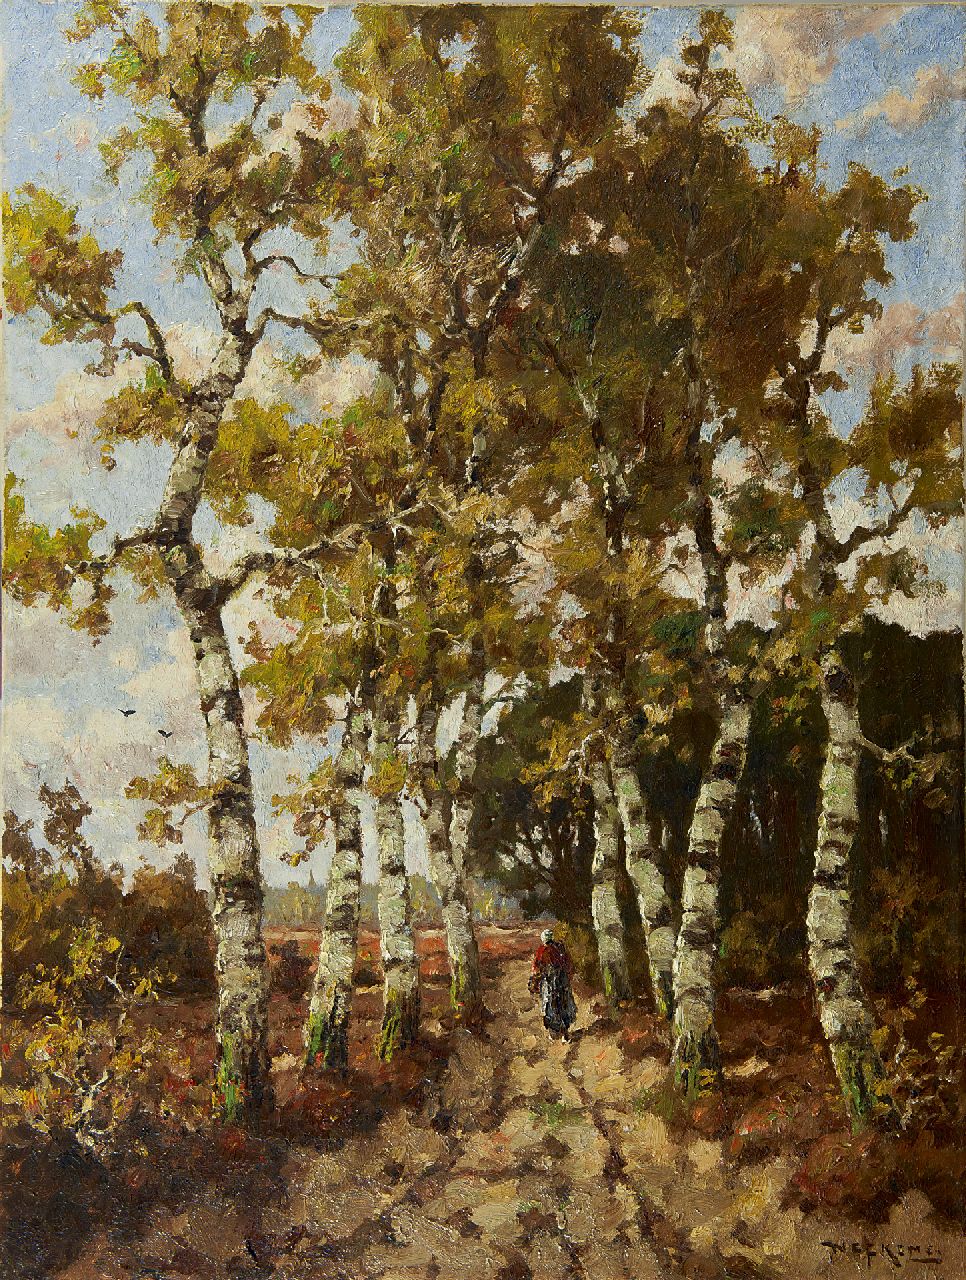 Nefkens M.J.  | Martinus Jacobus Nefkens | Paintings offered for sale | A beech forest path, oil on canvas 80.2 x 60.5 cm, signed l.r.